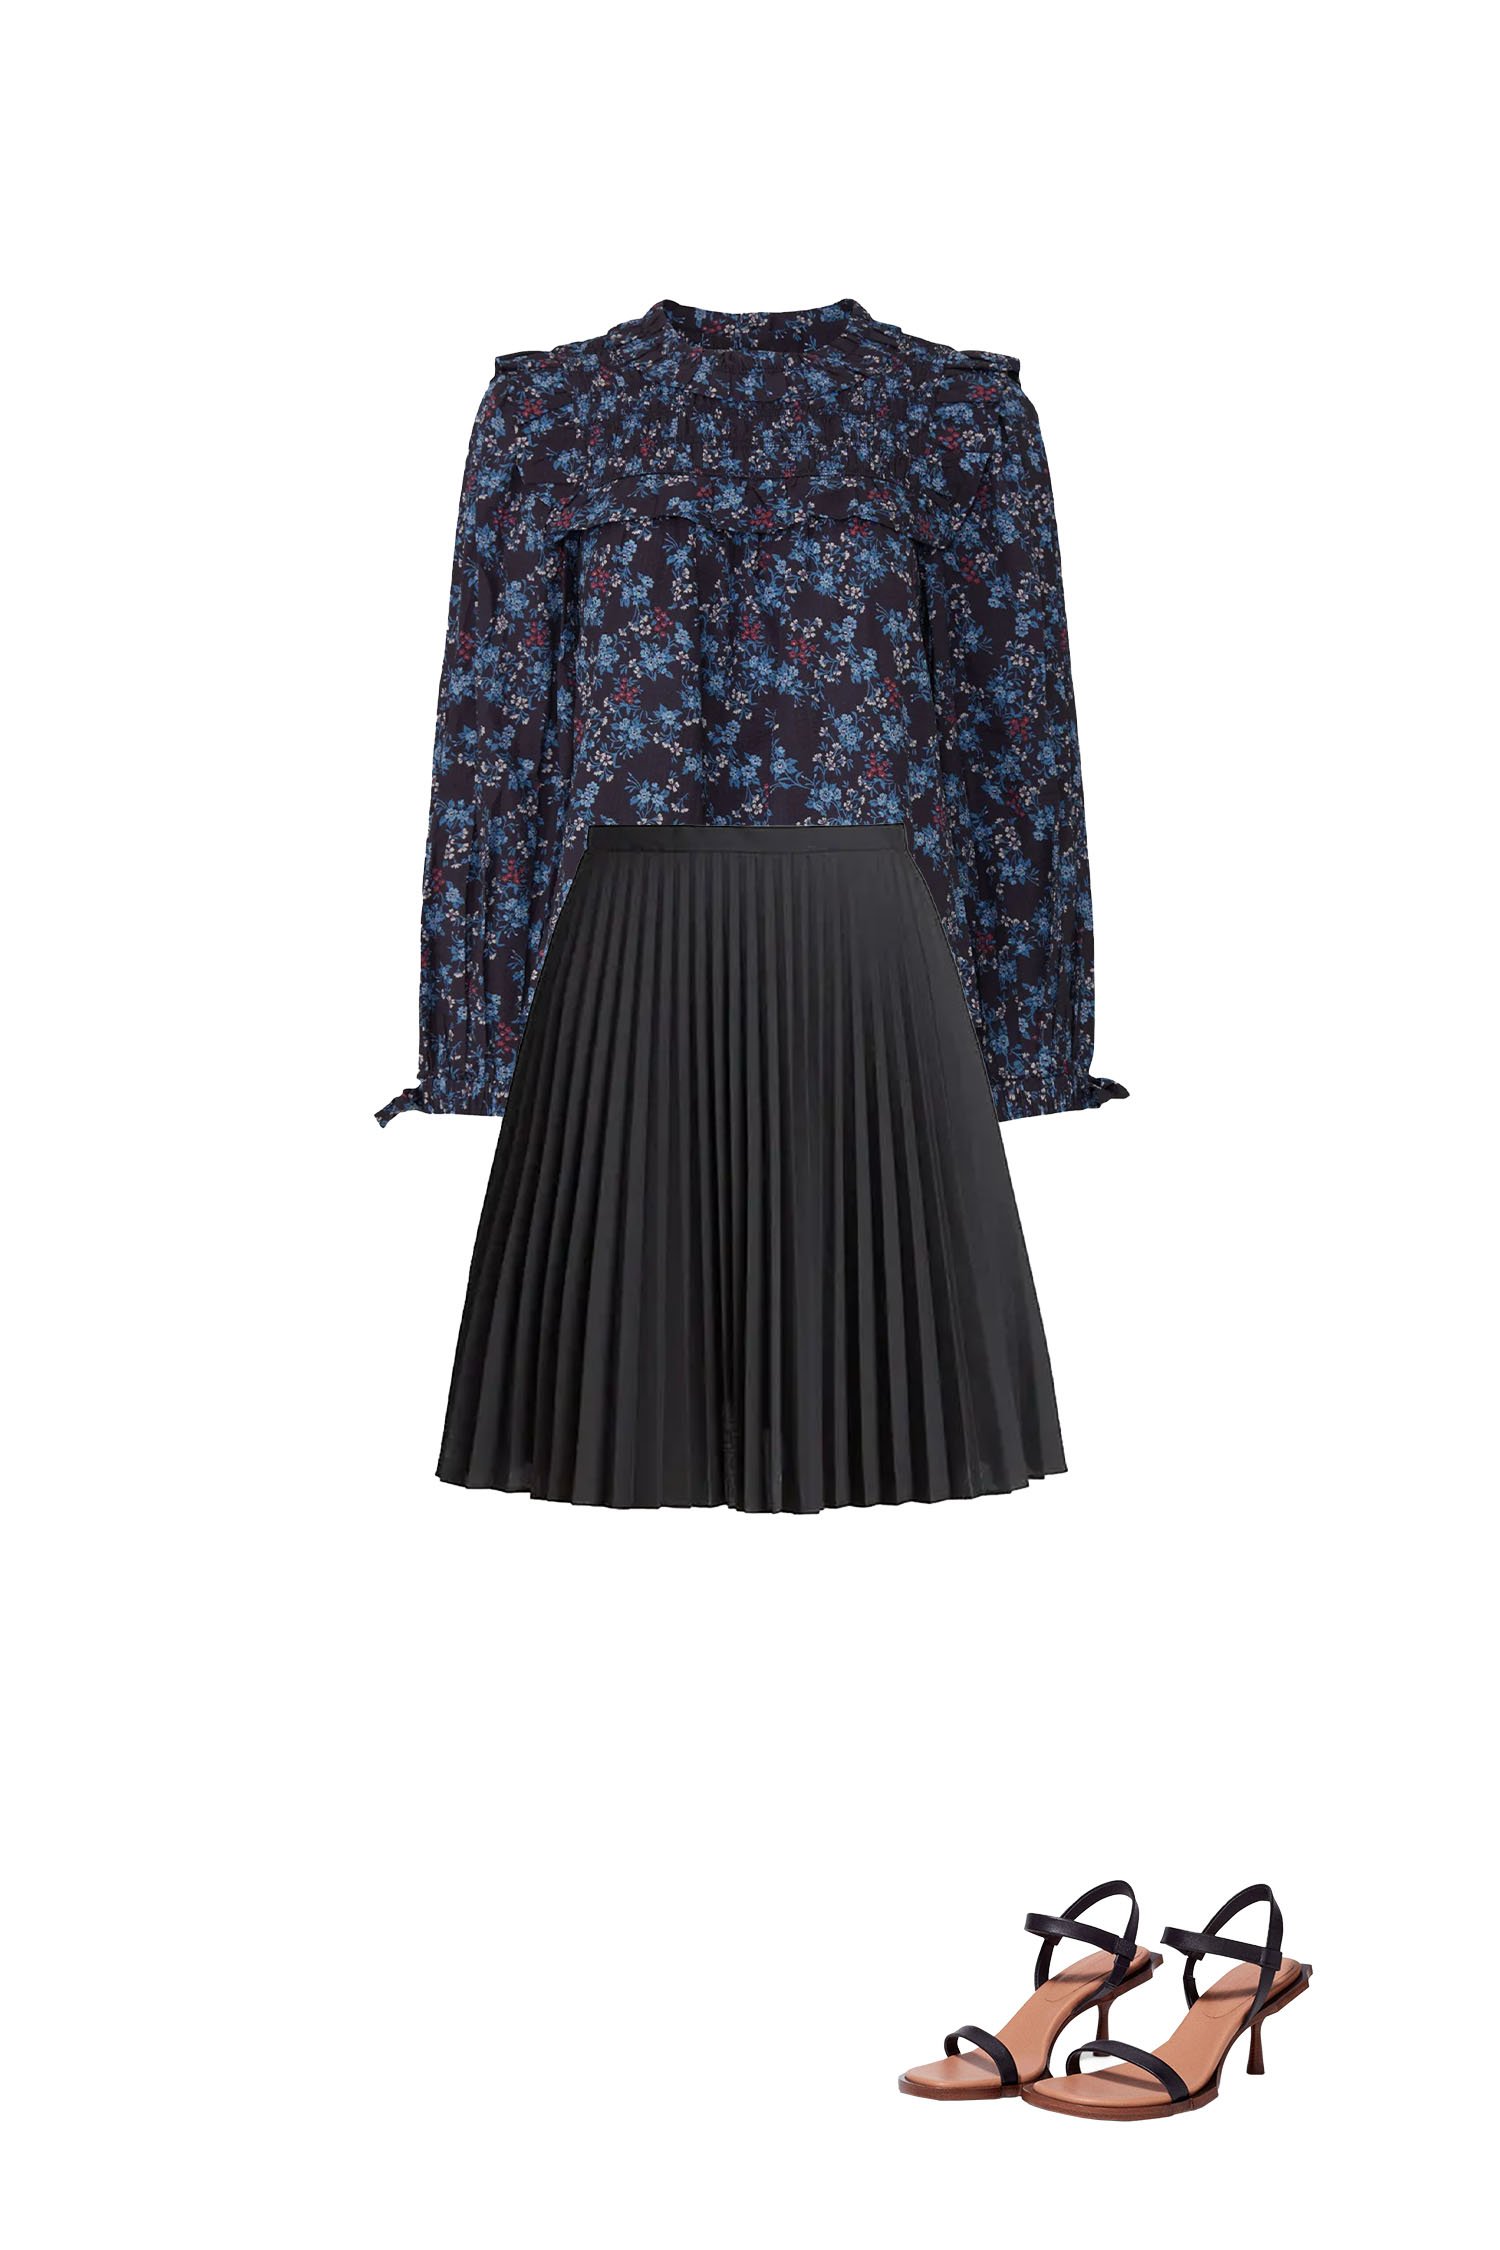 Black Pleated Short Skirt Outfit with Dark Blue Floral Print Blouse and Black Heeled Sandals